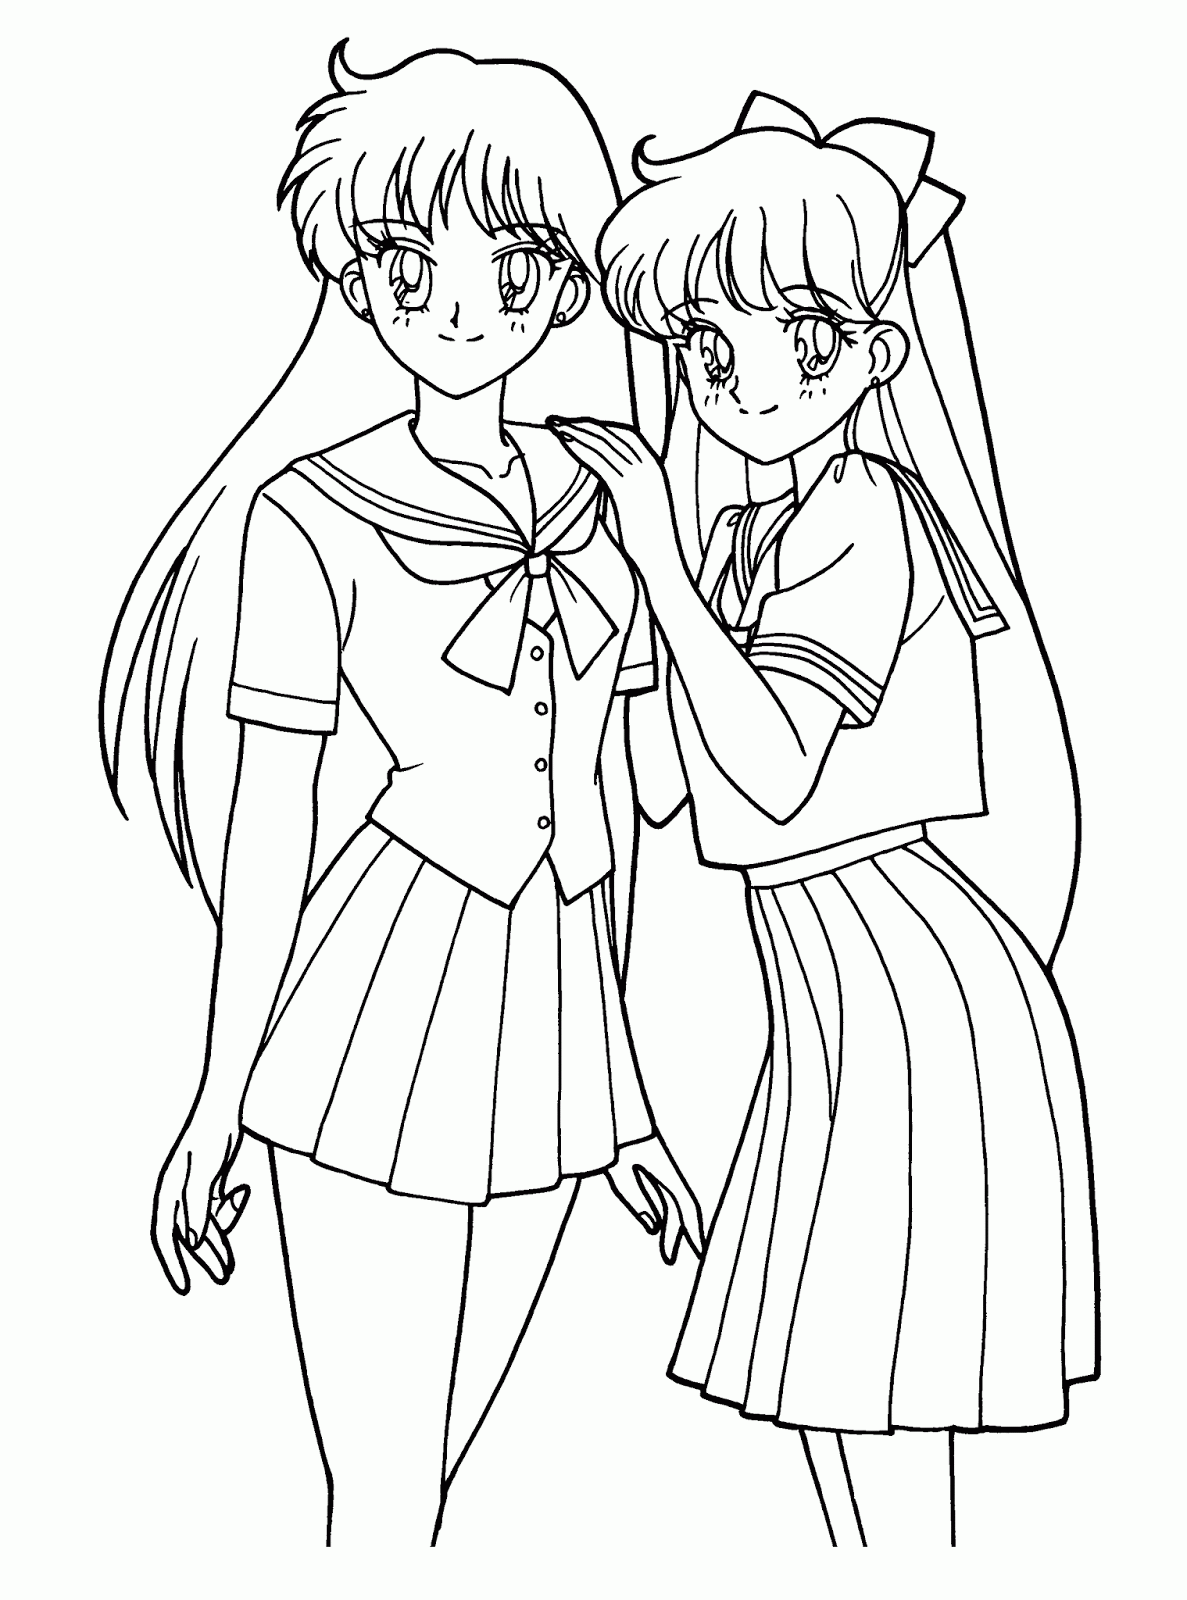 anime school girl coloring pages